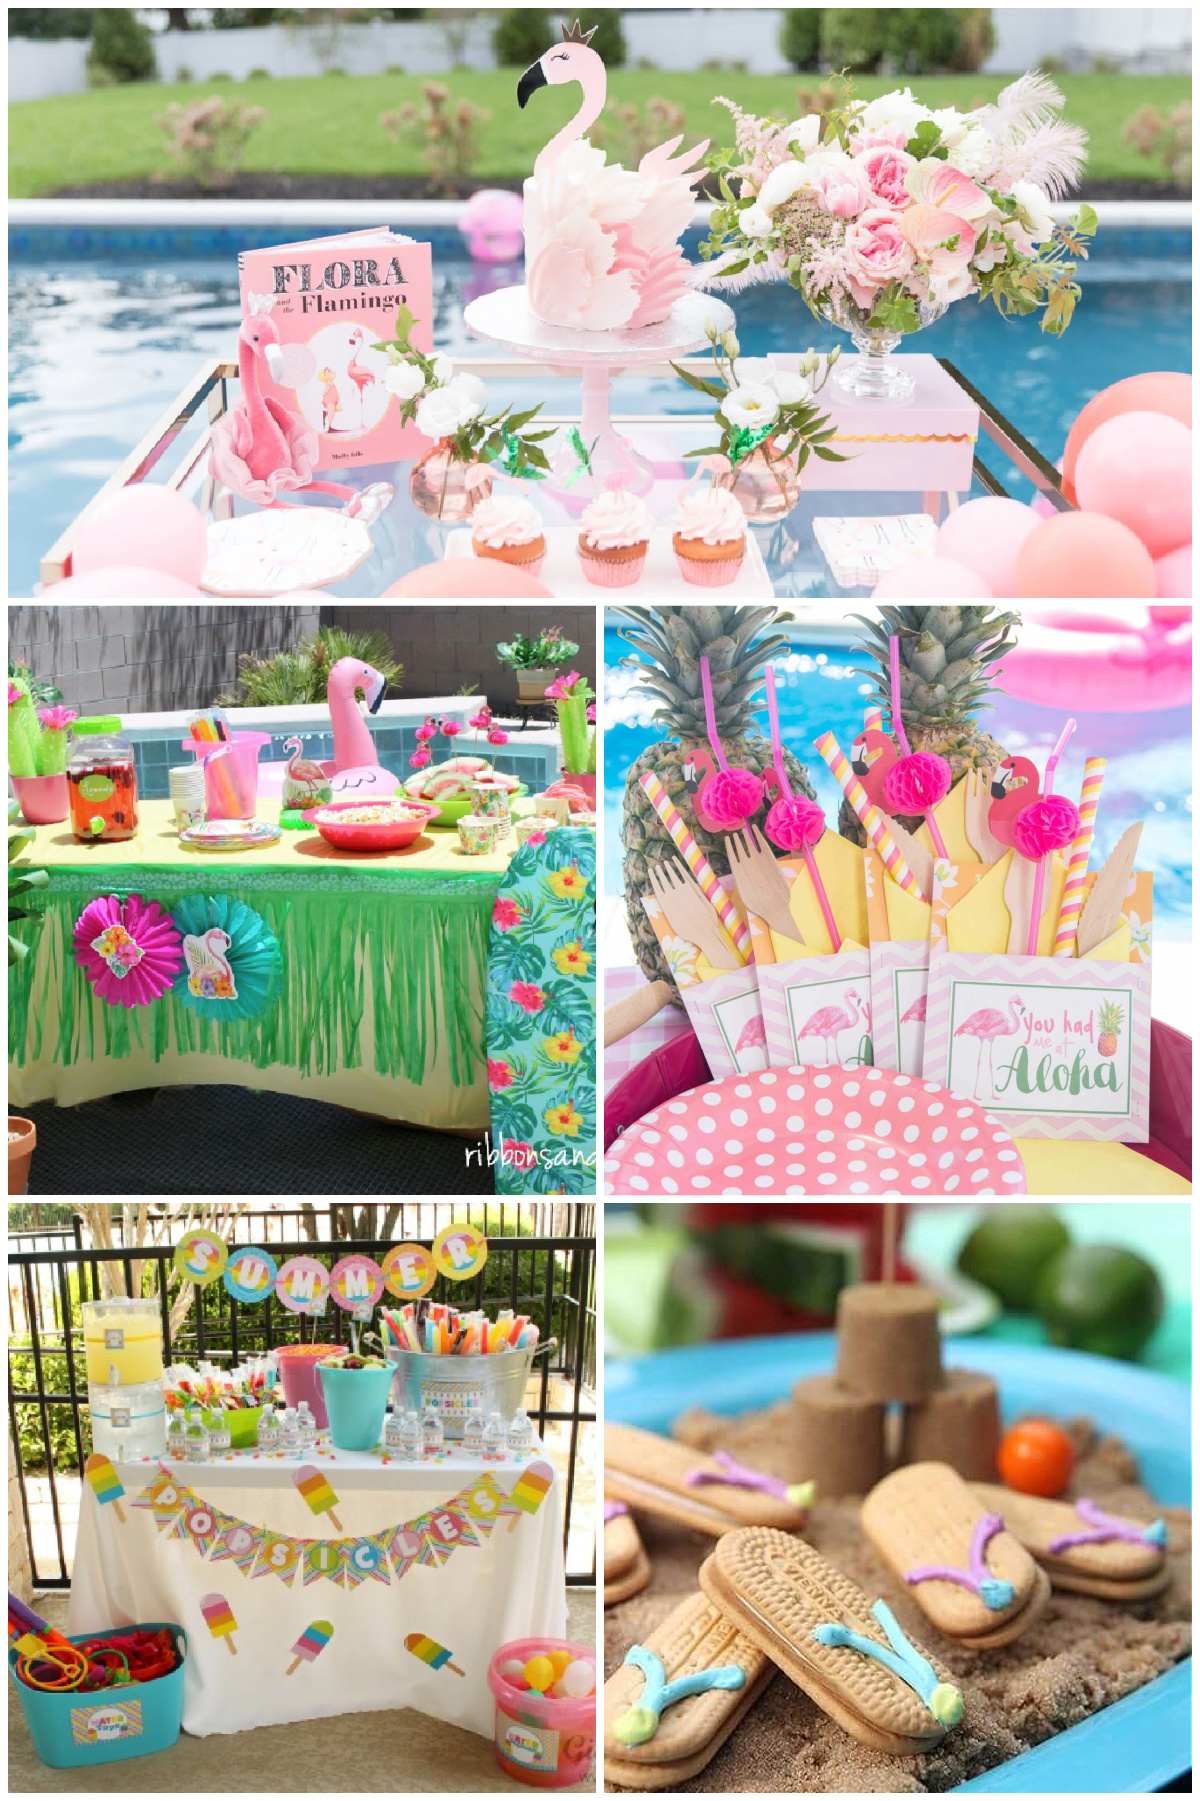 Three Theme Ideas for Your Next Pool Party at Home - Completehome